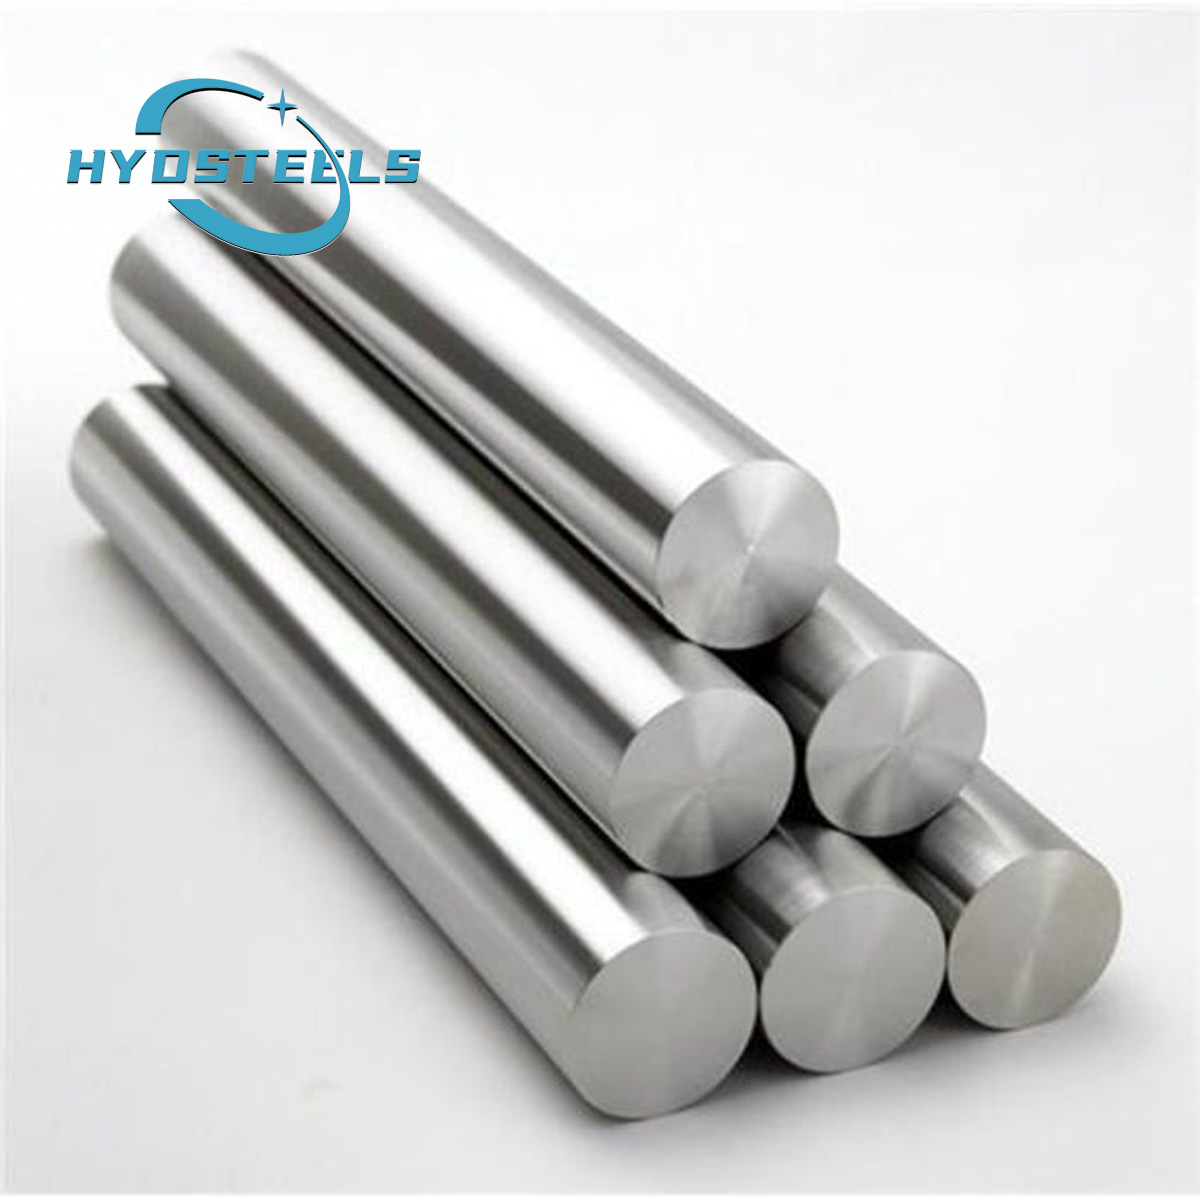 Hard Chrome Plated Steel stock for Hydraulic Cylinder rod Suppliers